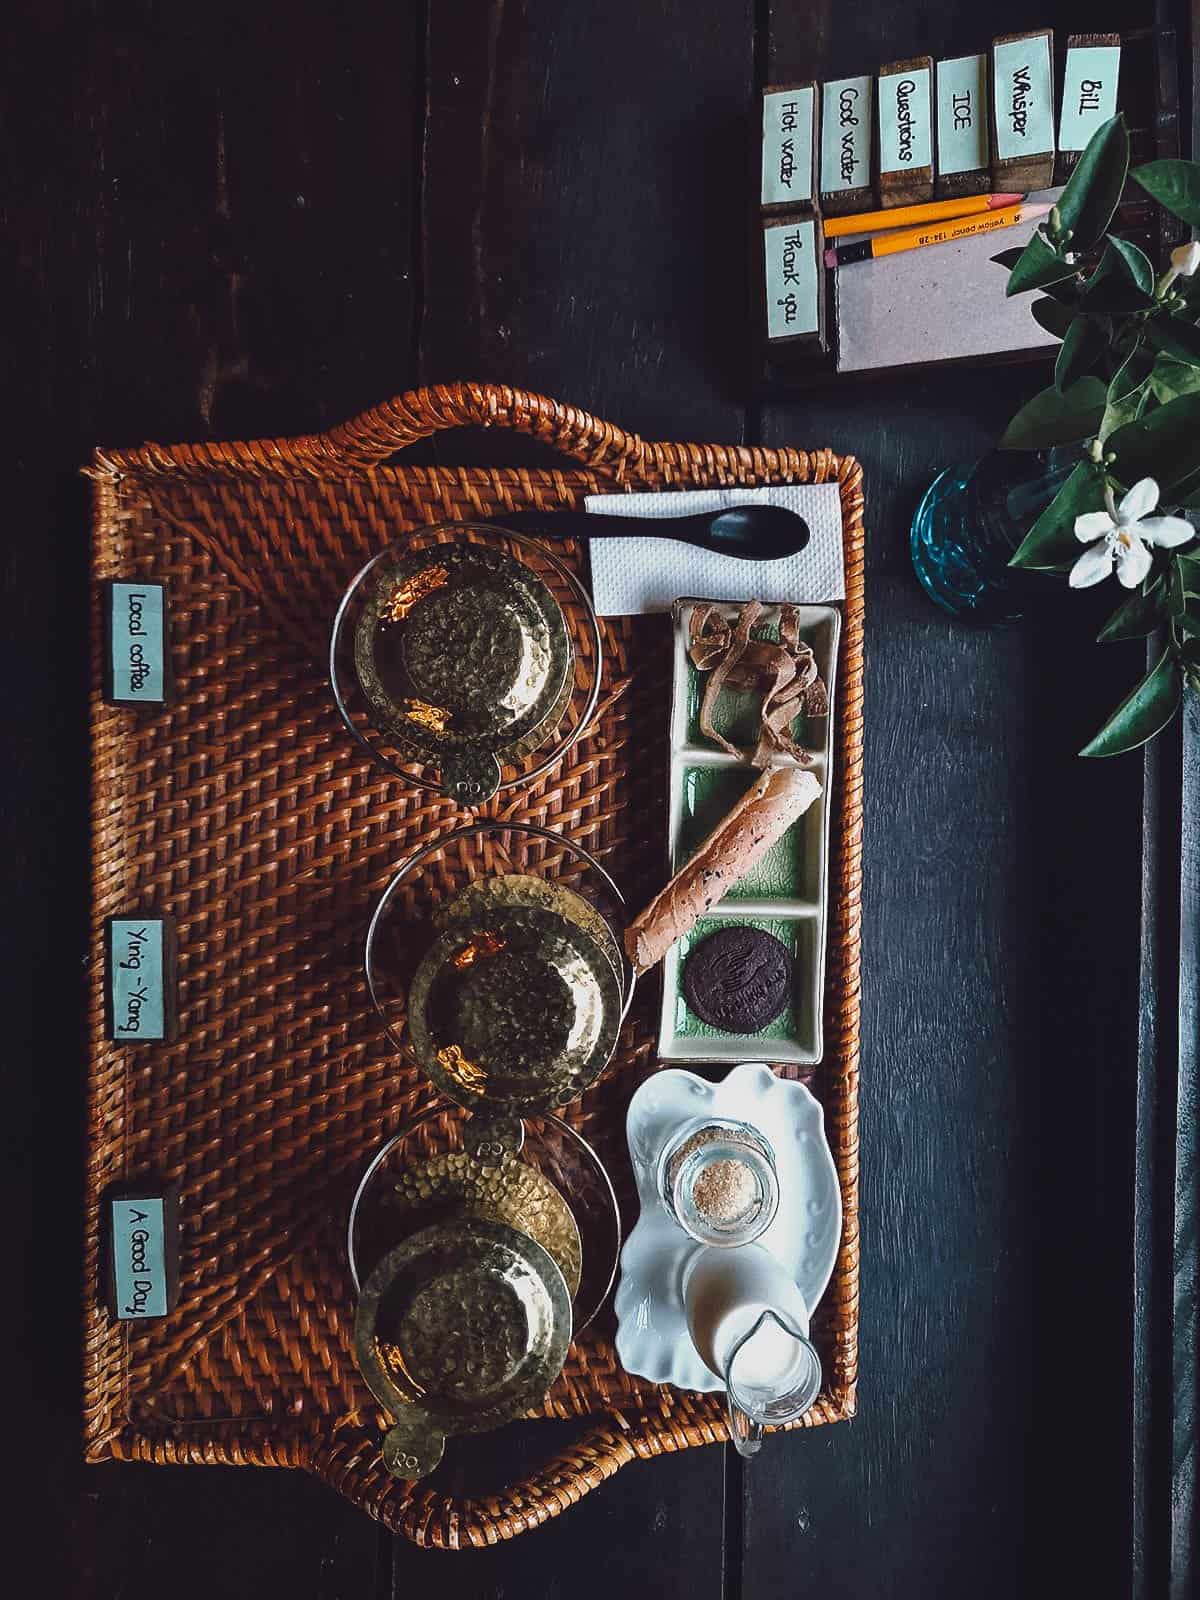 Coffee tasting set at Reaching Out Tea House in Hoi An, Vietnam